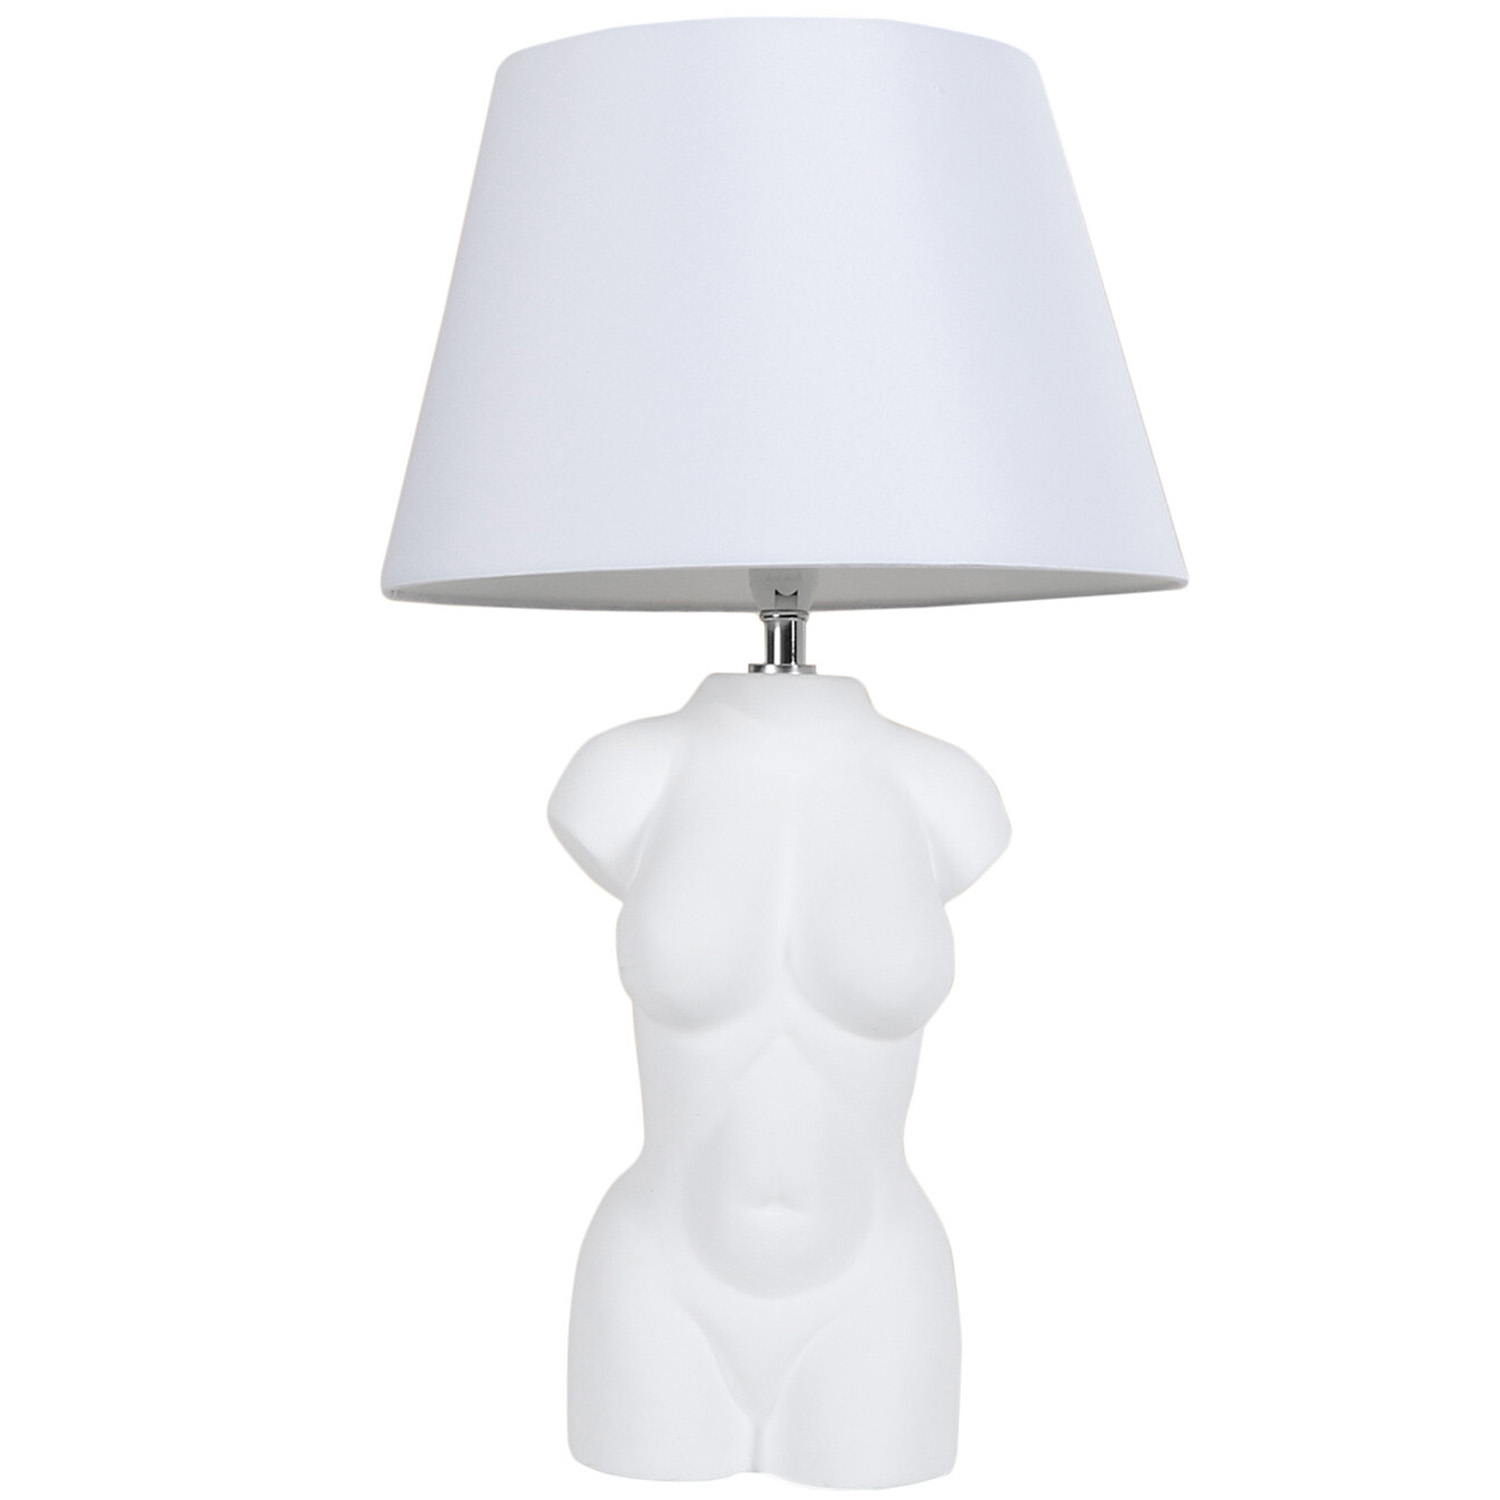 Body Table Lamp Image 1